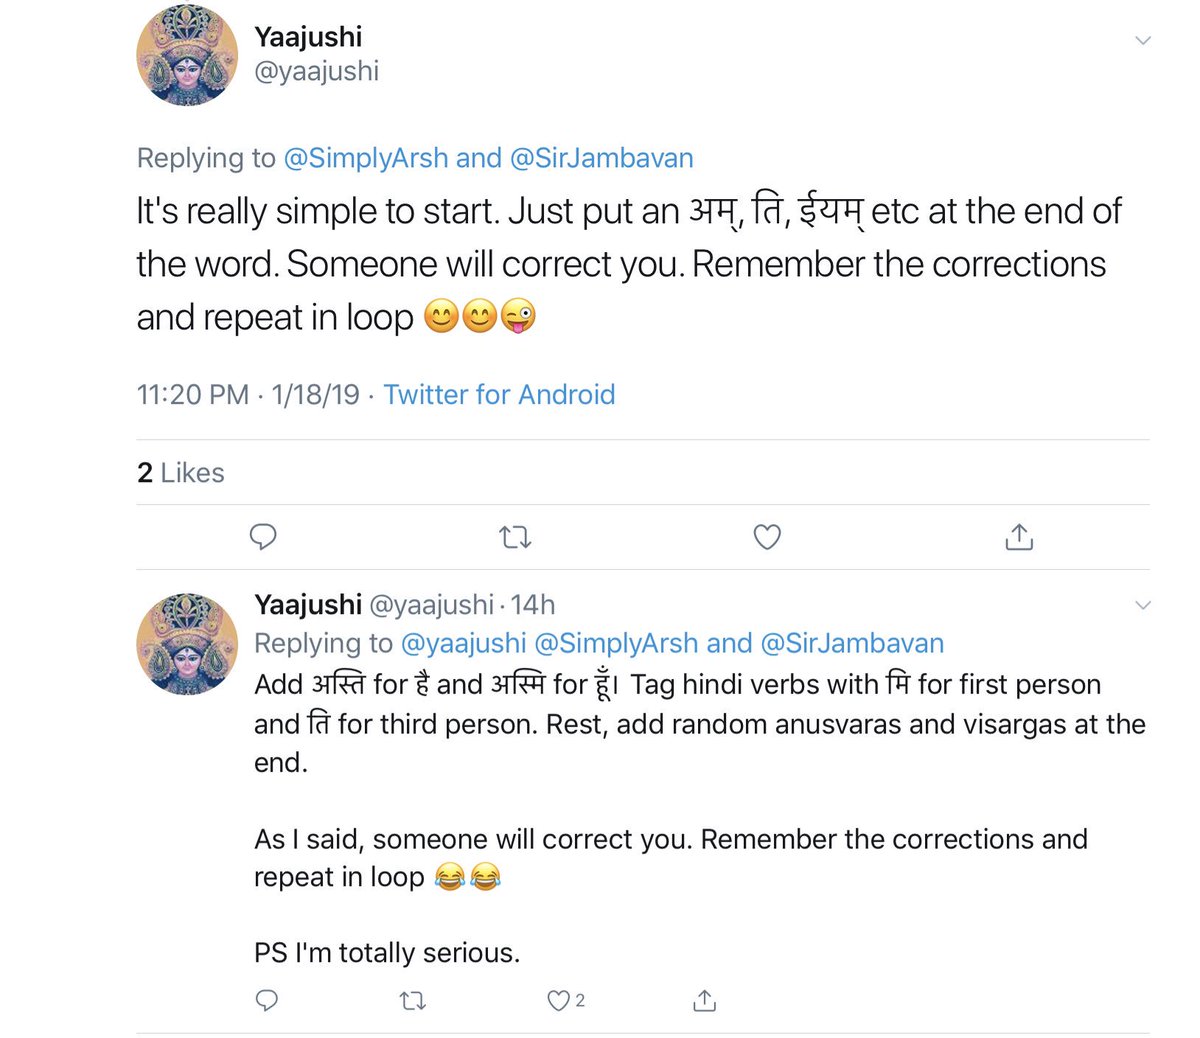 Keeping the thread open so that I can keep adding advice/tips from others to help folks get started with writing the देवभाषालिखतु संस्कृतम् From  @yaajushi  https://twitter.com/yaajushi/status/1086478423156015104?s=21